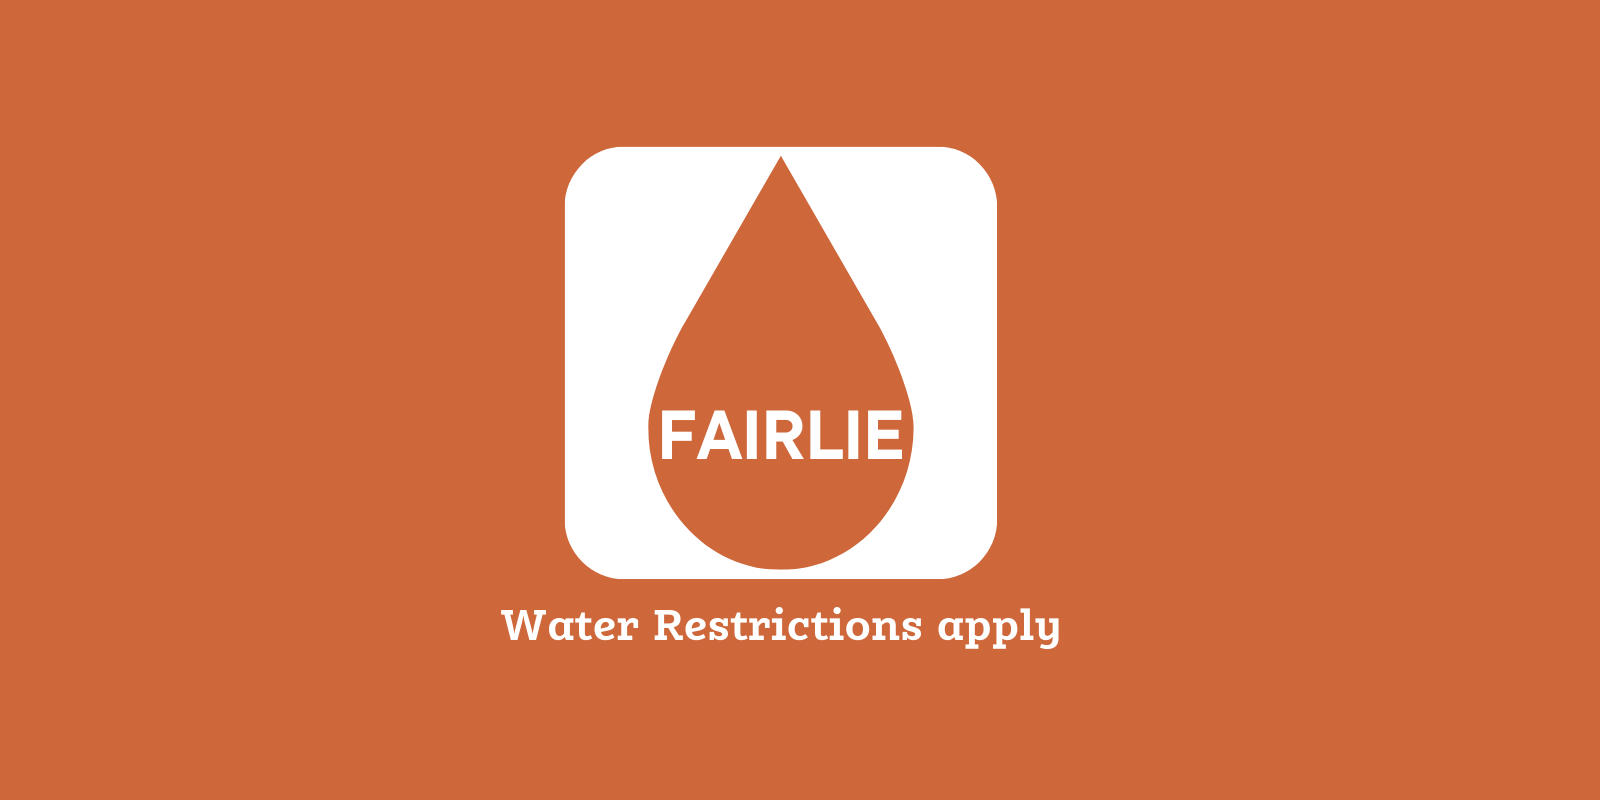 Fairlie - Water restrictions apply 1600x800 banner image